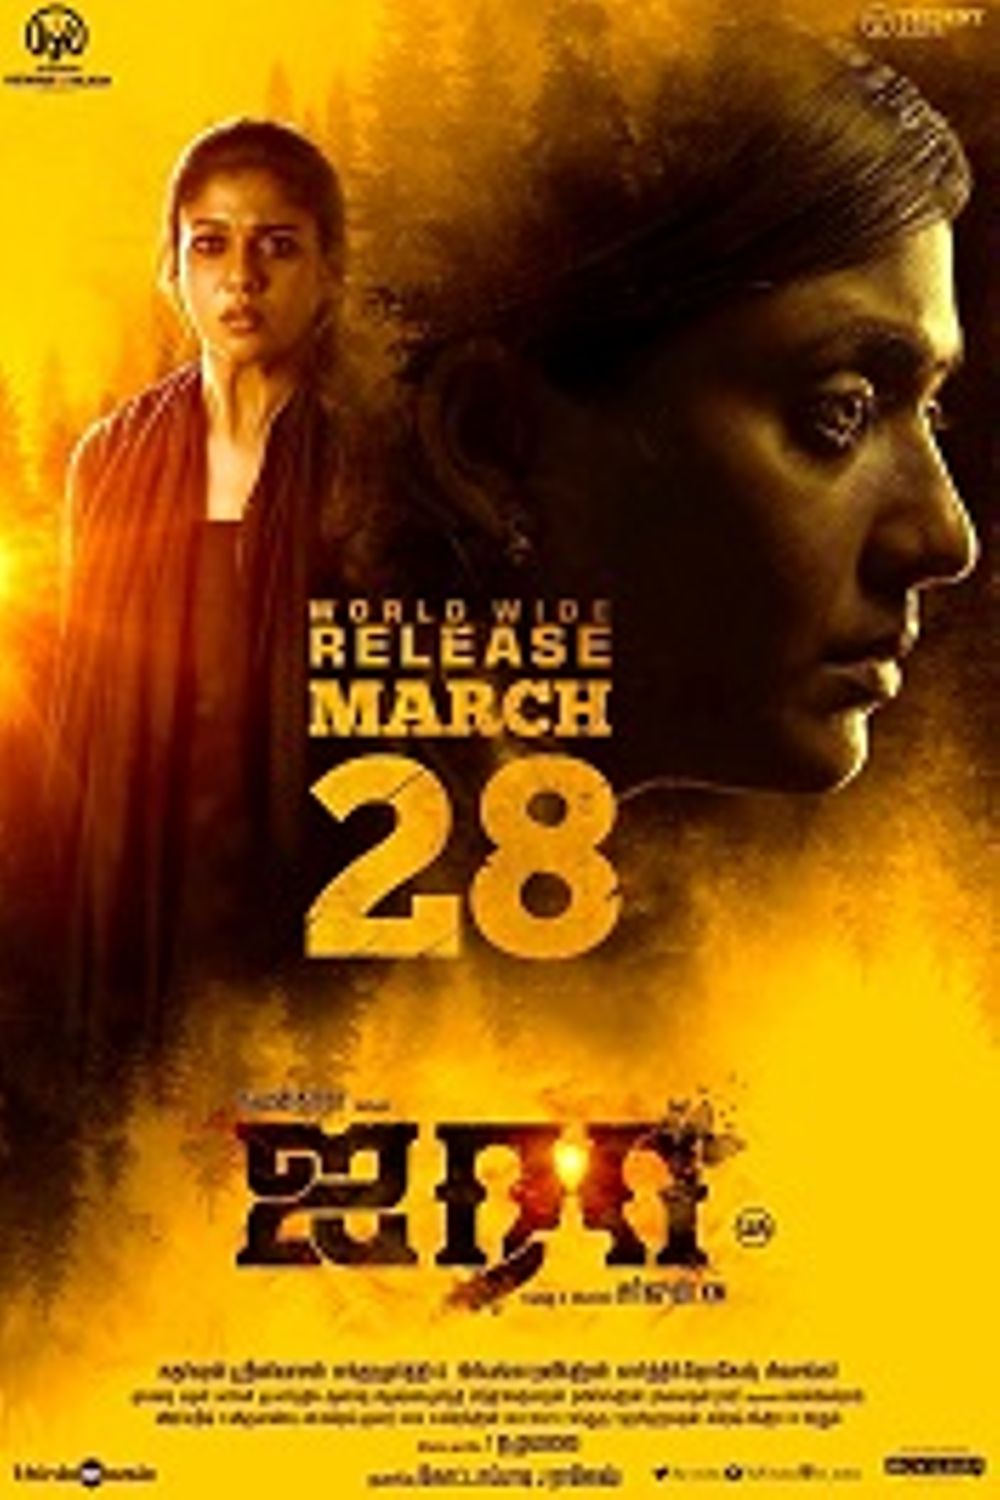 Airaa Movie Review